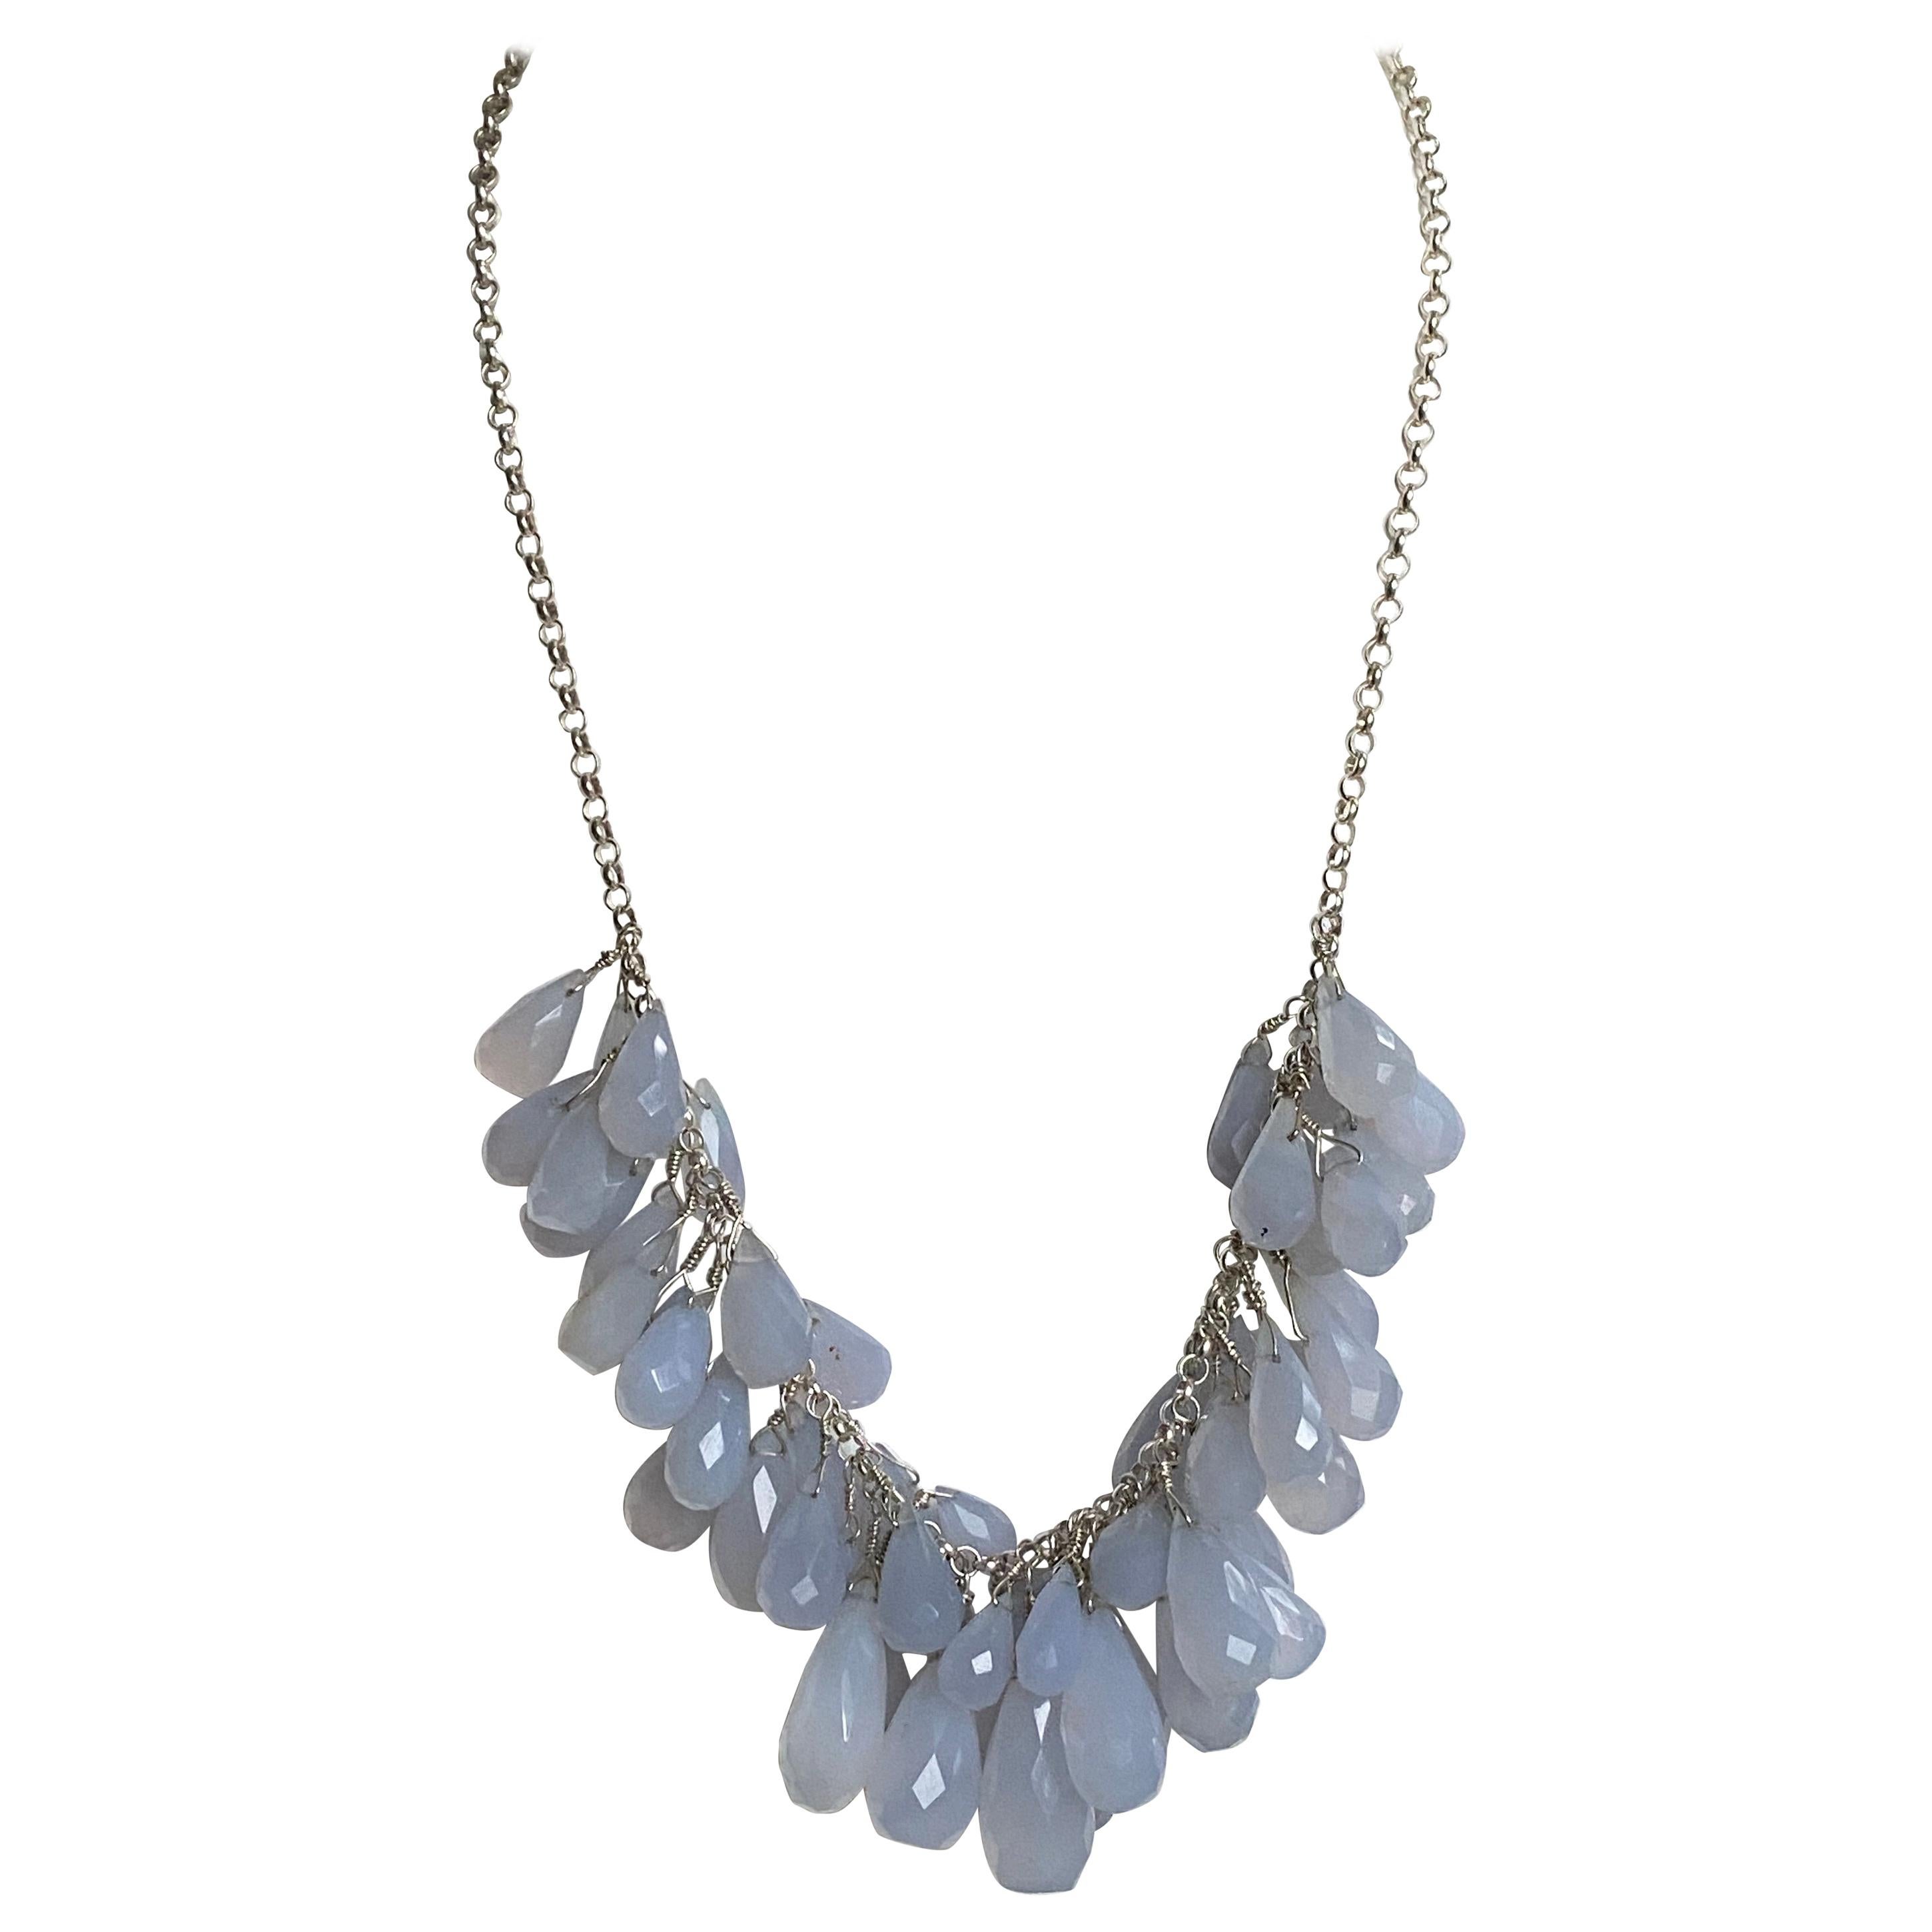 Natural Briolette Powder Blue Chalcedony Drops in a Sterling Silver Necklace For Sale